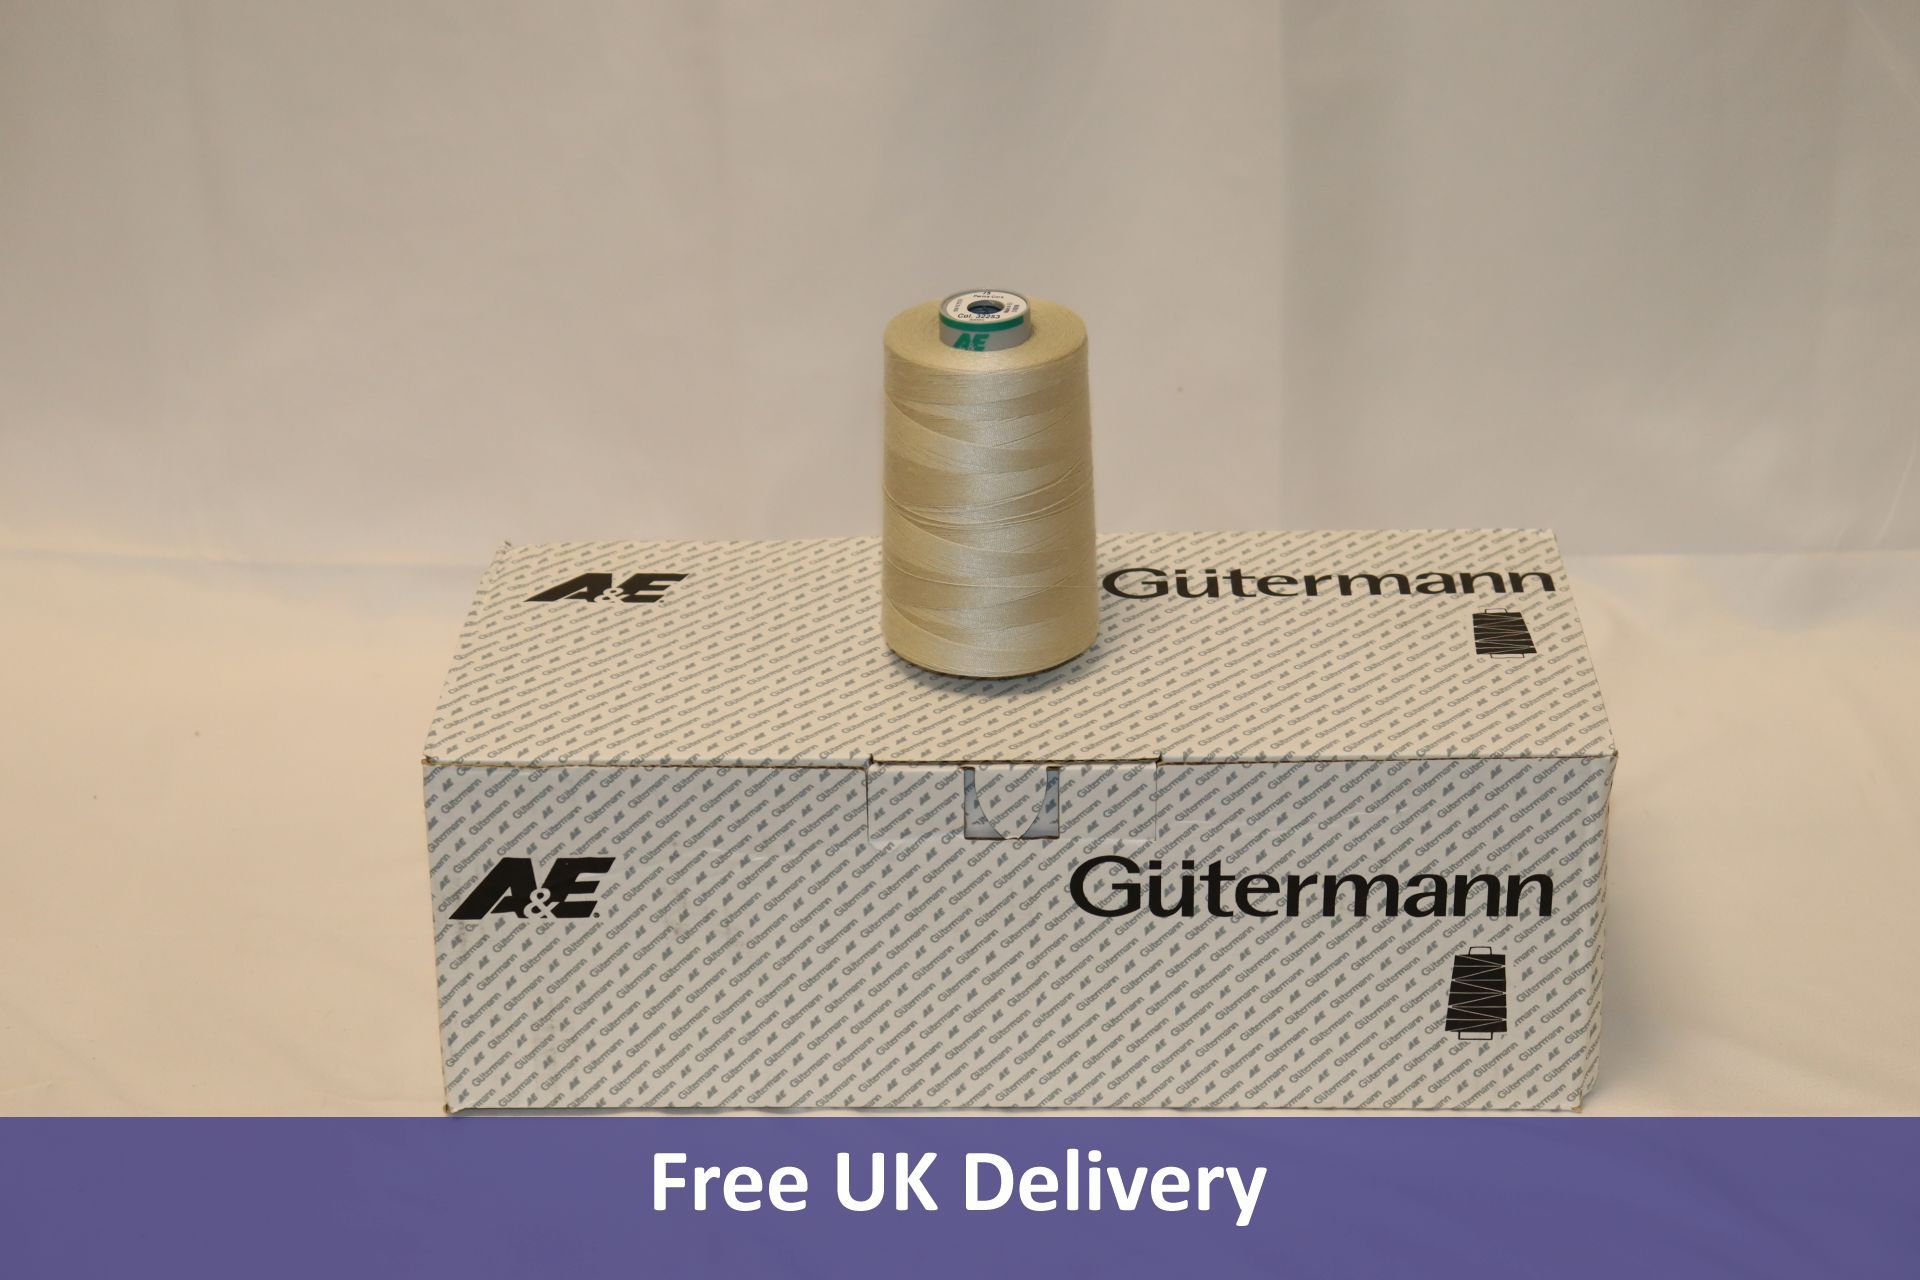 Sixty Rolls Gutermann Perma-core 75 Thread, for Denim and heavy duty seams, 44500 - Image 5 of 6